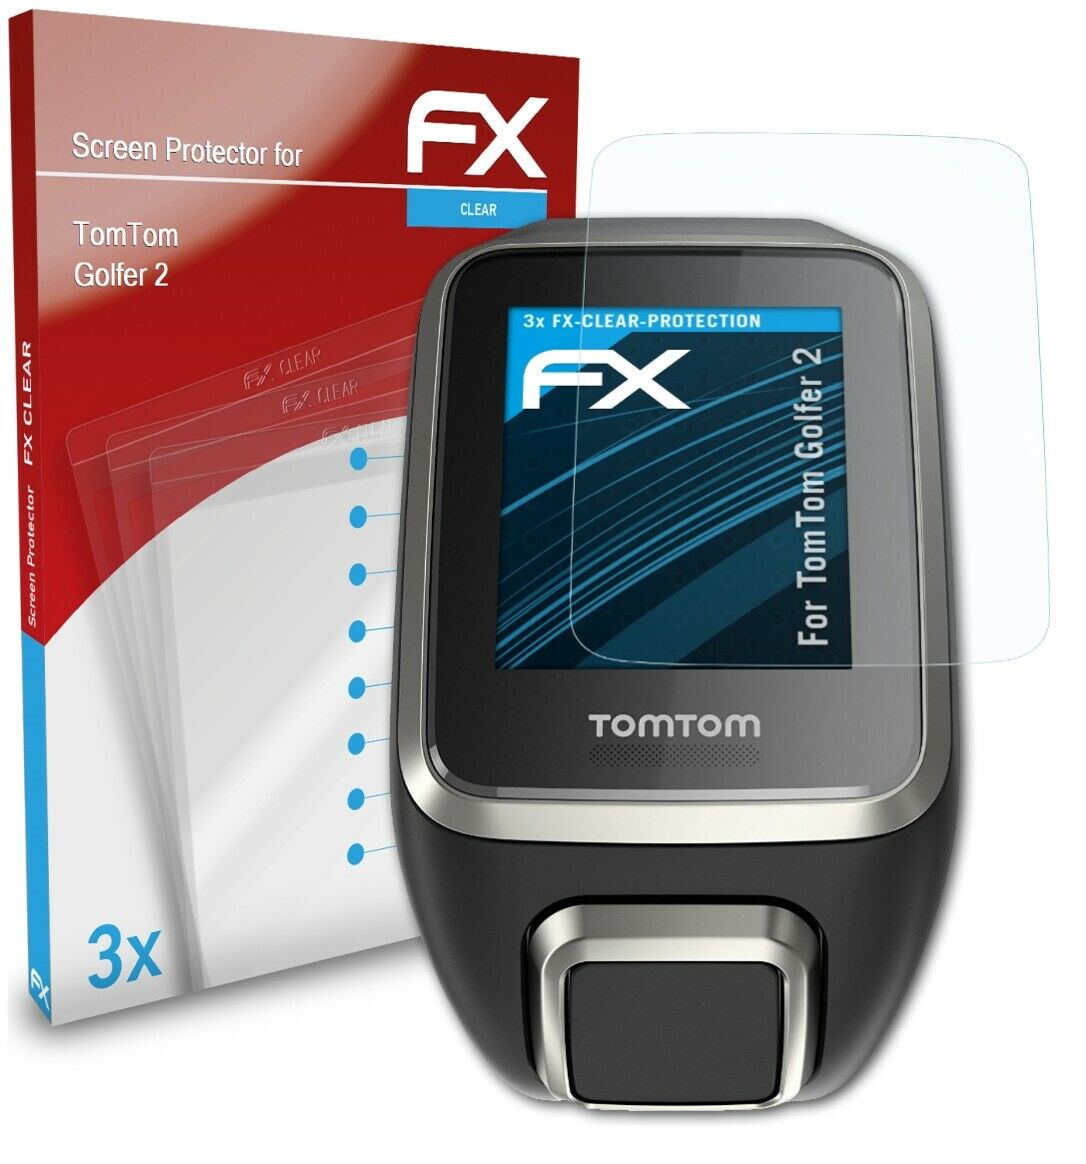 atFoliX 3x Screen Protection Film for TomTom Golfer 2 Screen Protector clear